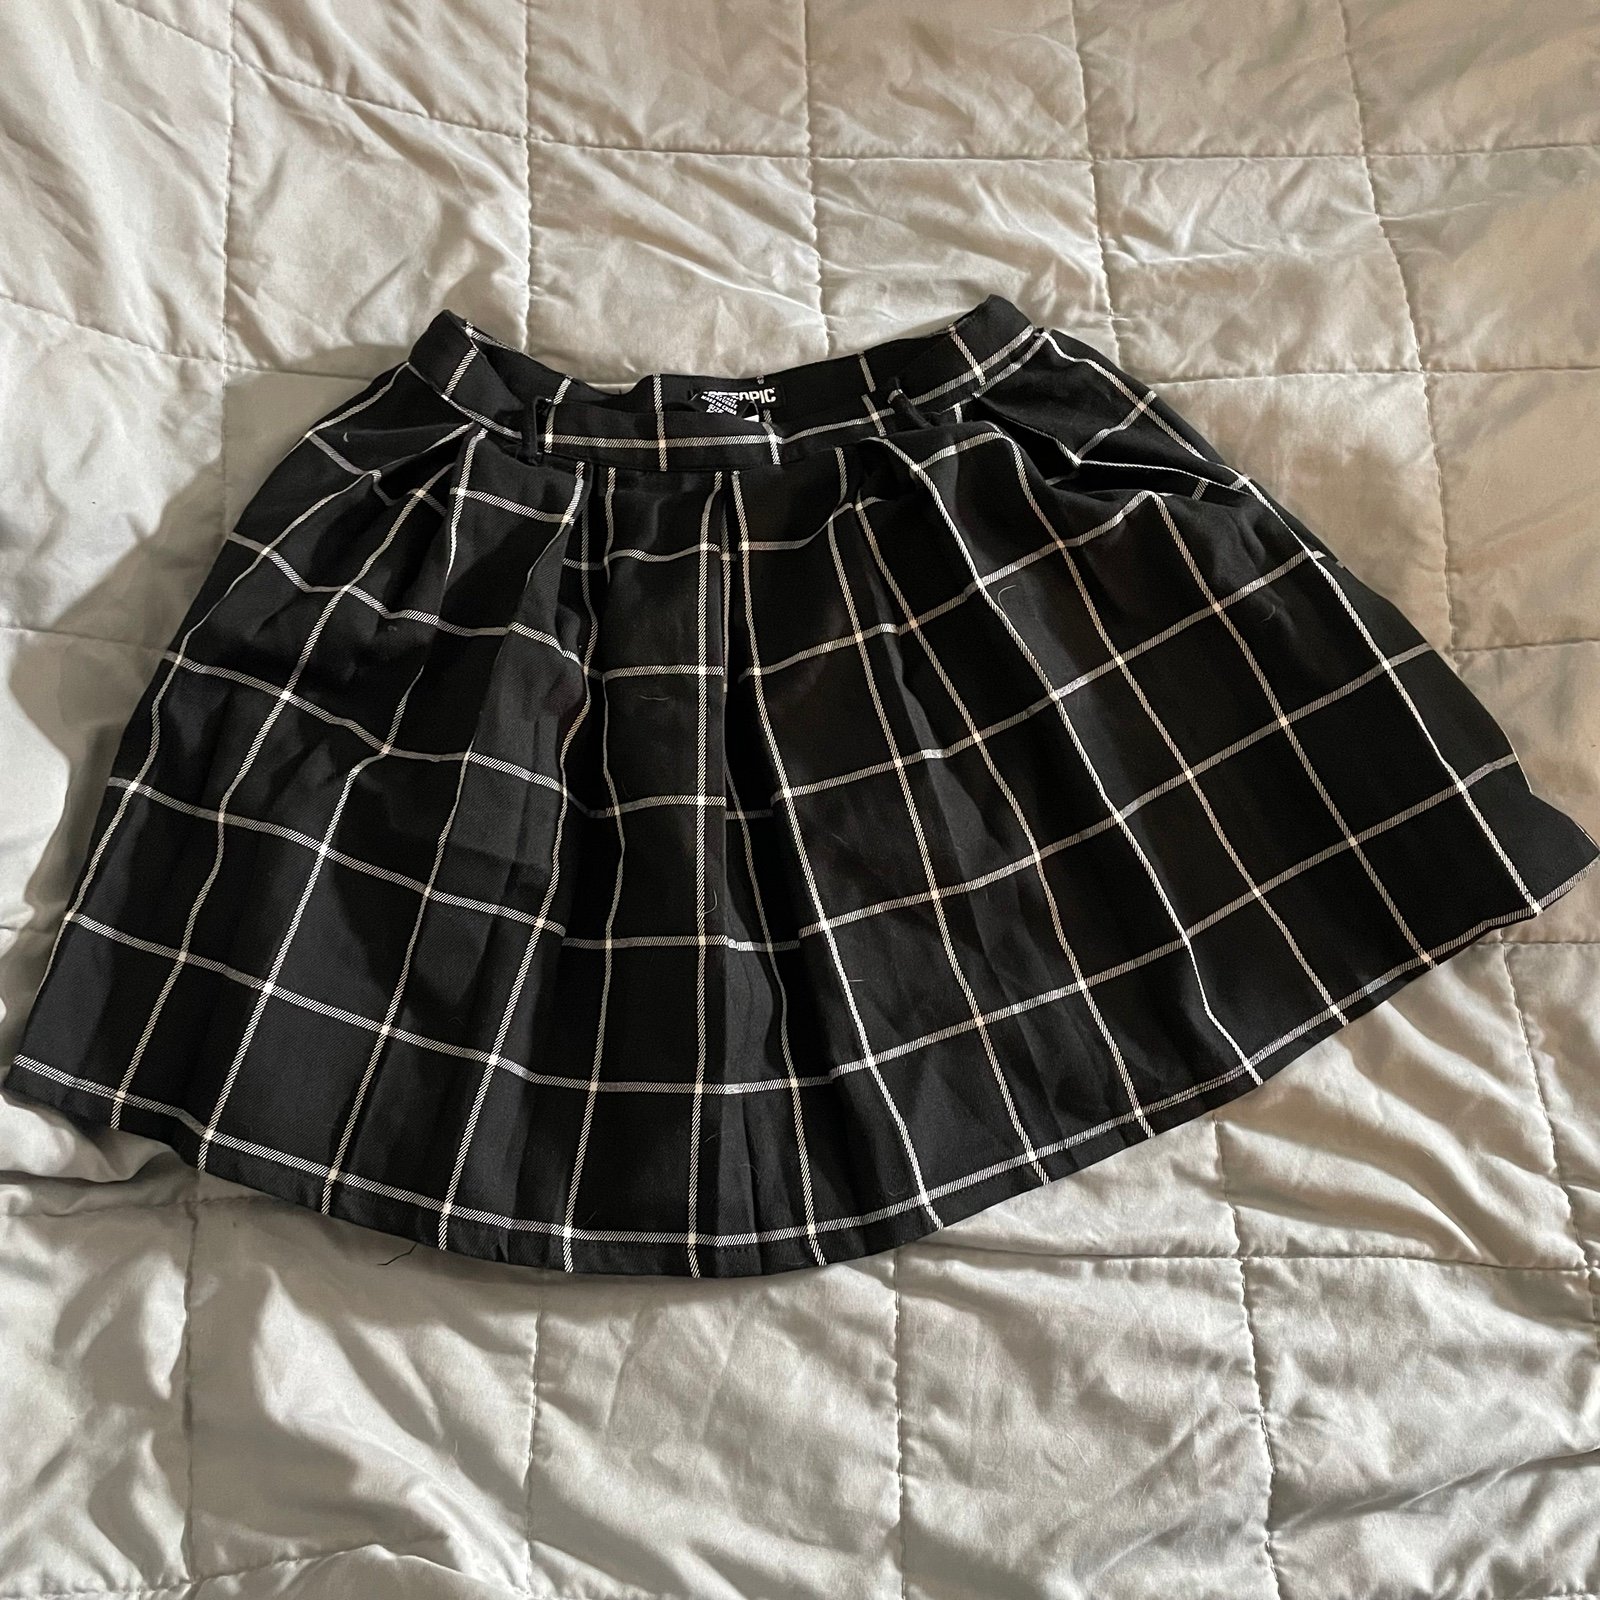 save up to 70% hot topic plaid skirt hzQH2PDaA Everyday